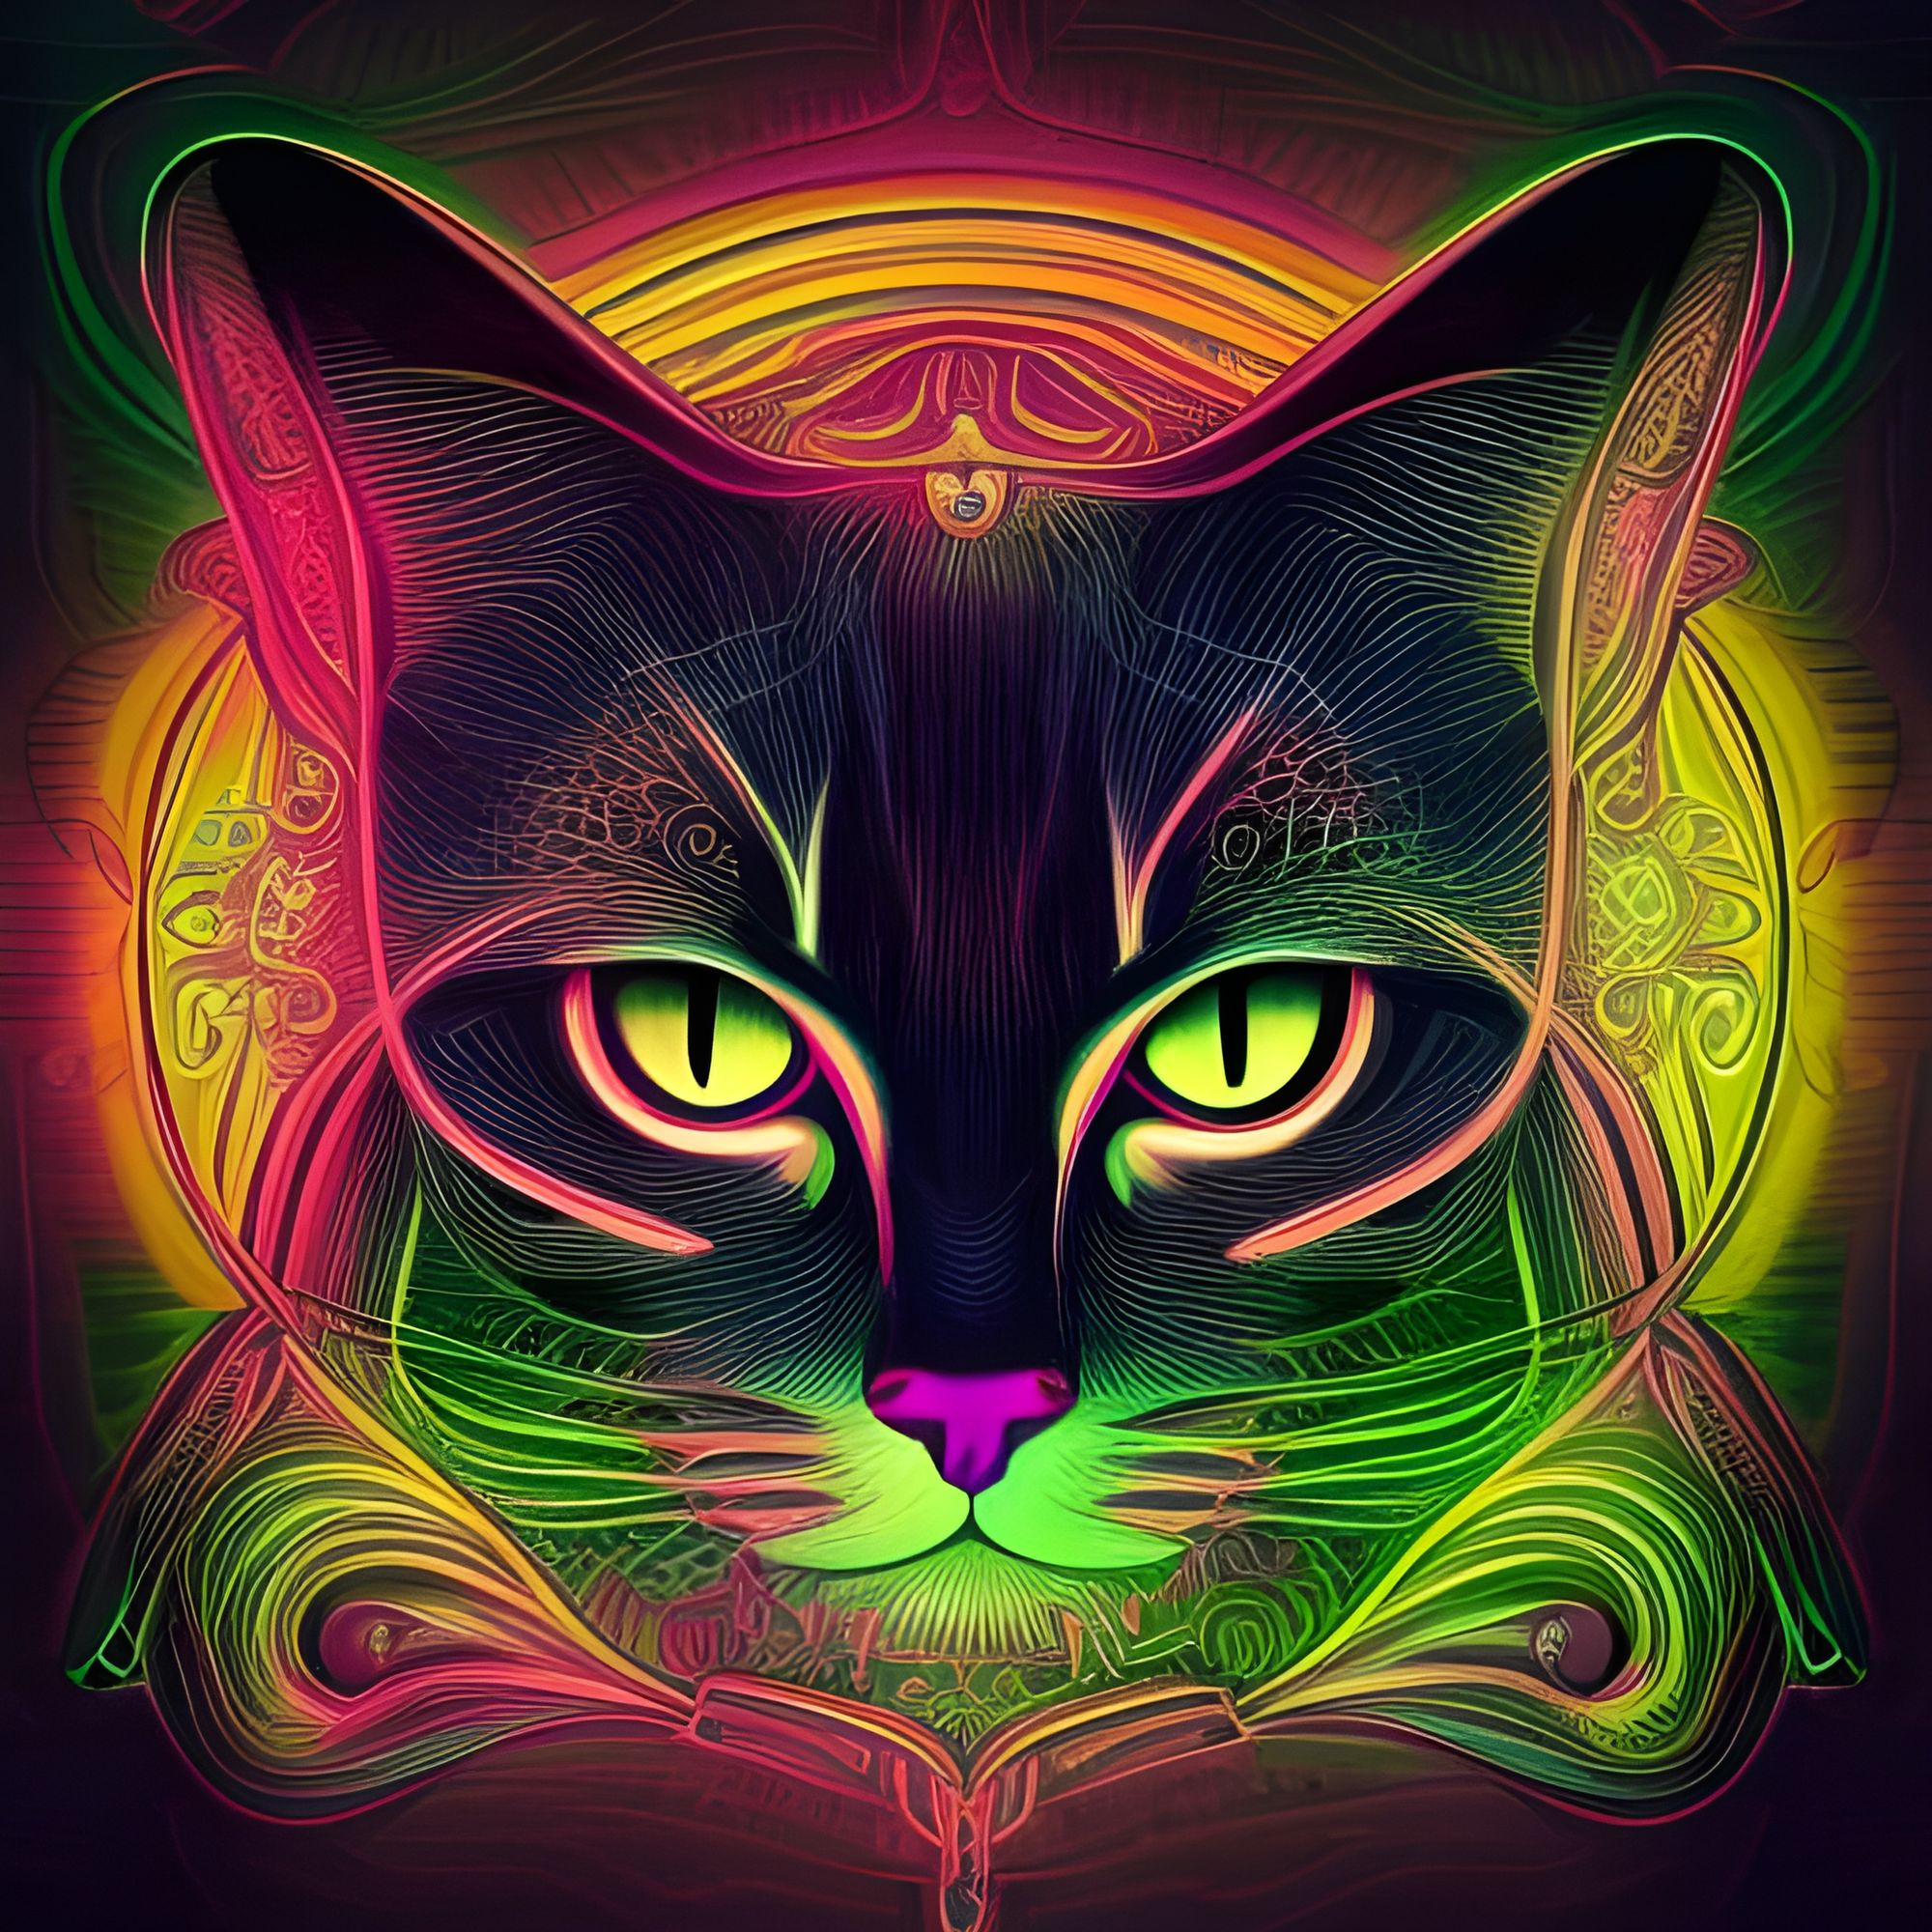 Mobile wallpaper Cats Cat Neon Butterfly Animal Green Eyes 479233  download the picture for free